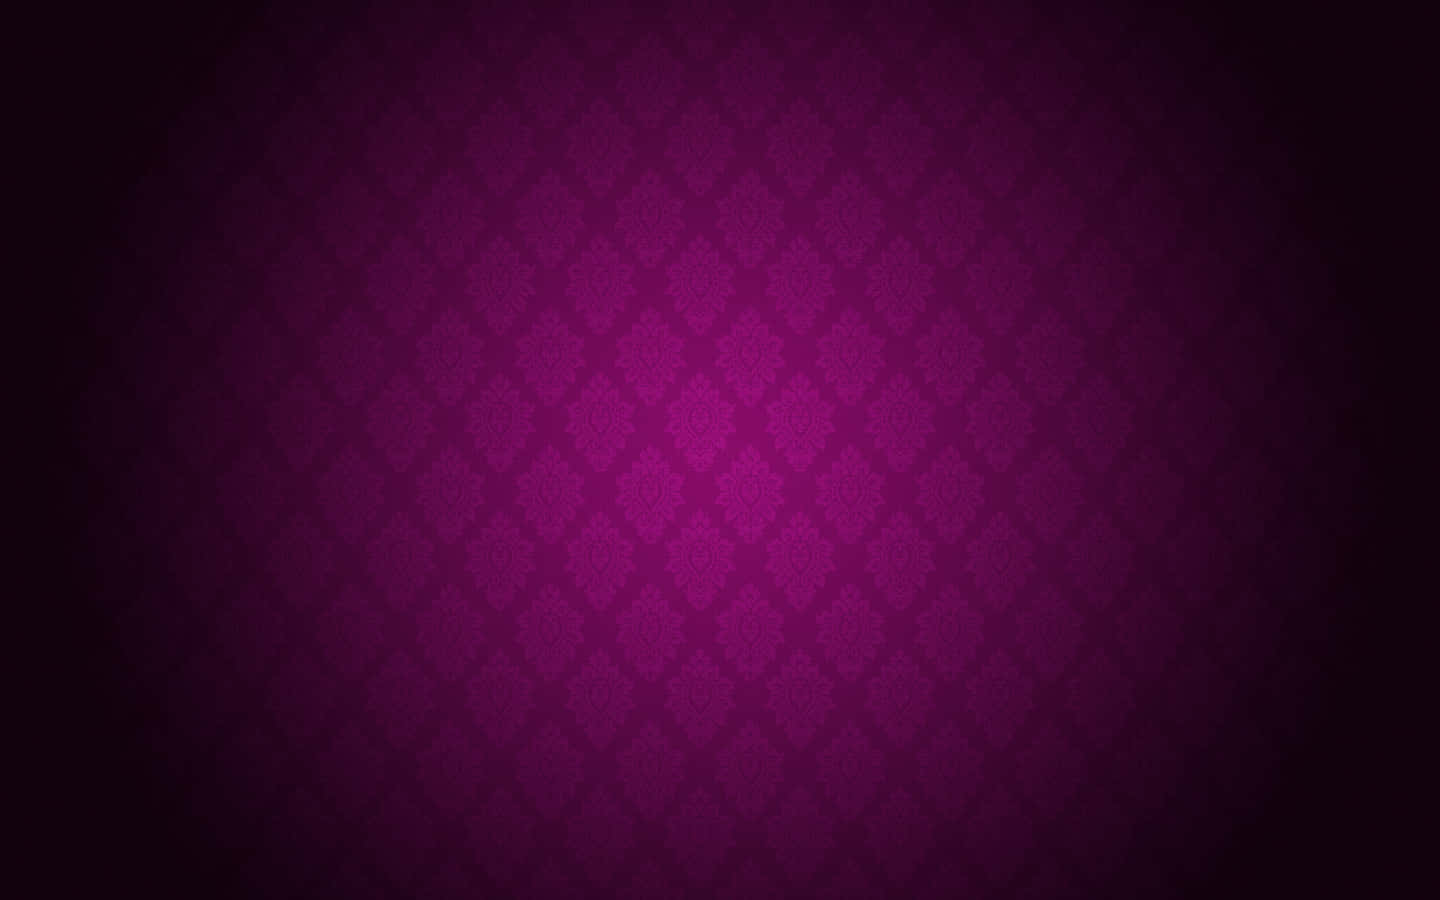 Colorful background with a gradient of purple, pink, and white